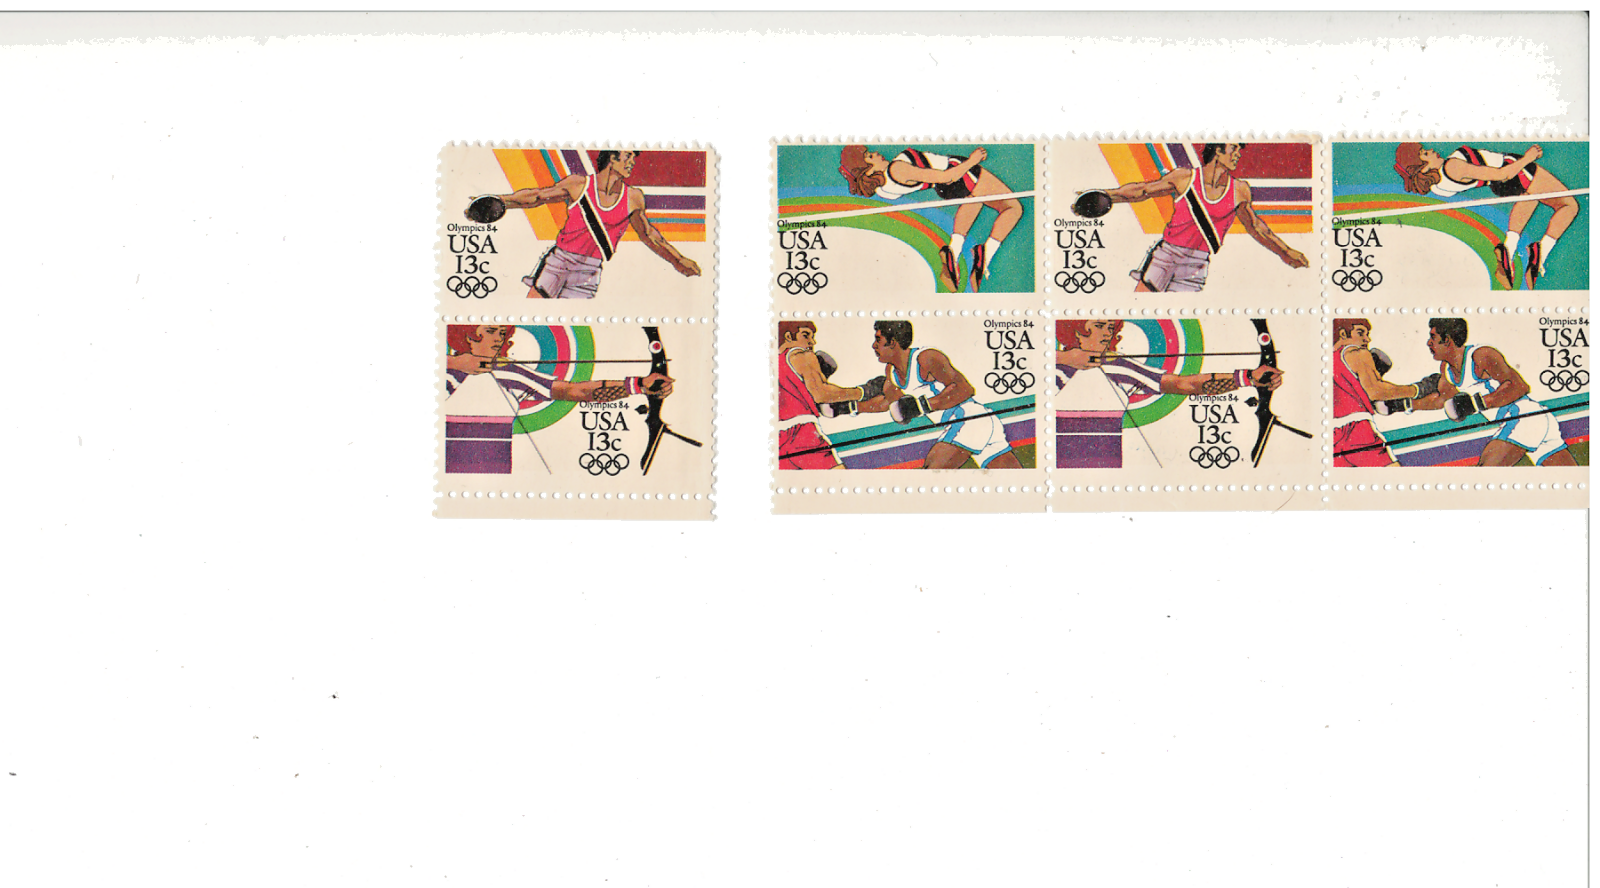 1983 OLYMPIC SPORTS STAMPS Без бренда